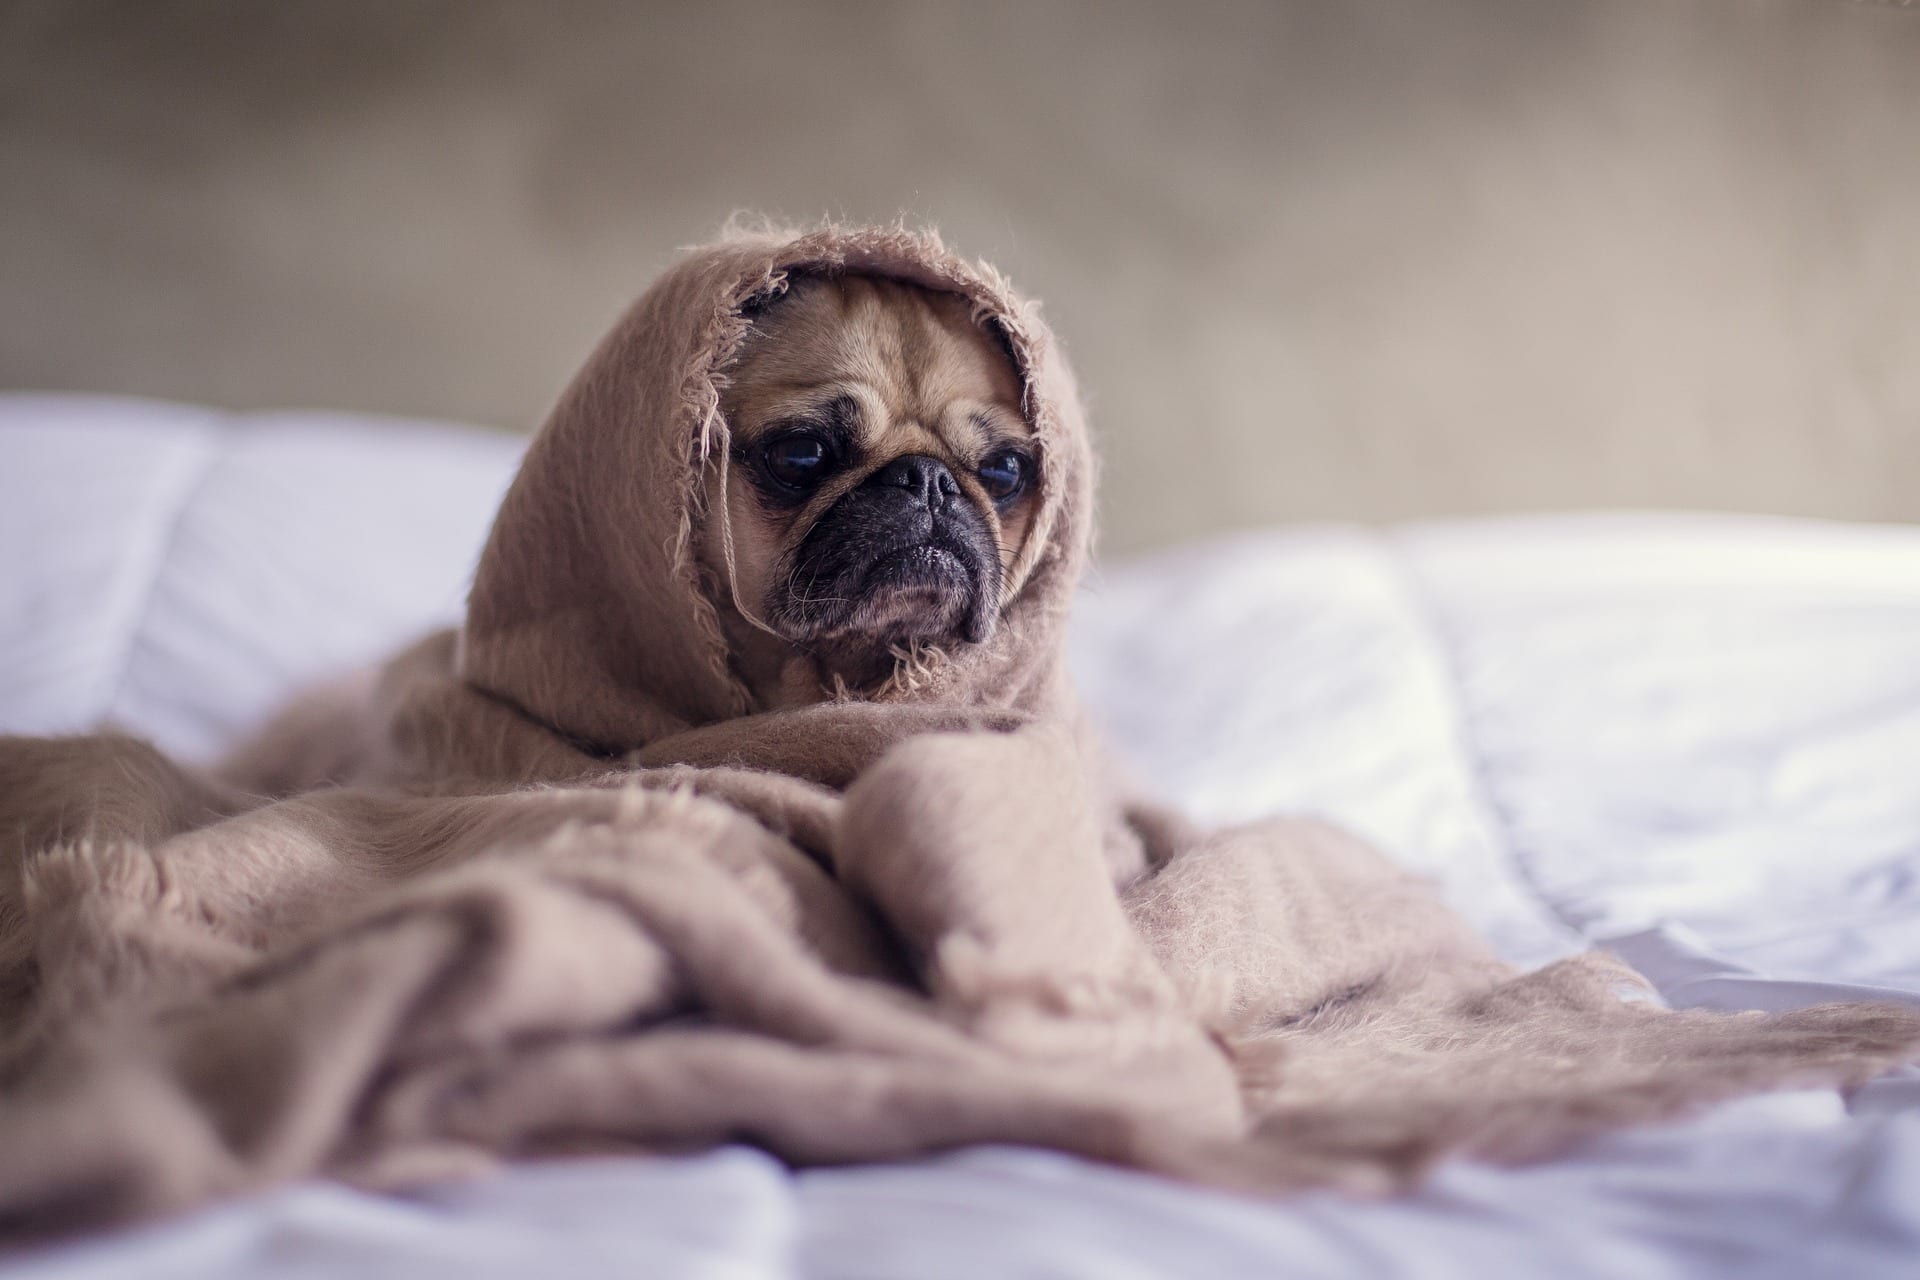 grumpy pug who didn't get sleep because someone was snoring so much in the night. learn more about getting better sleep from best mattress in las vegas, 